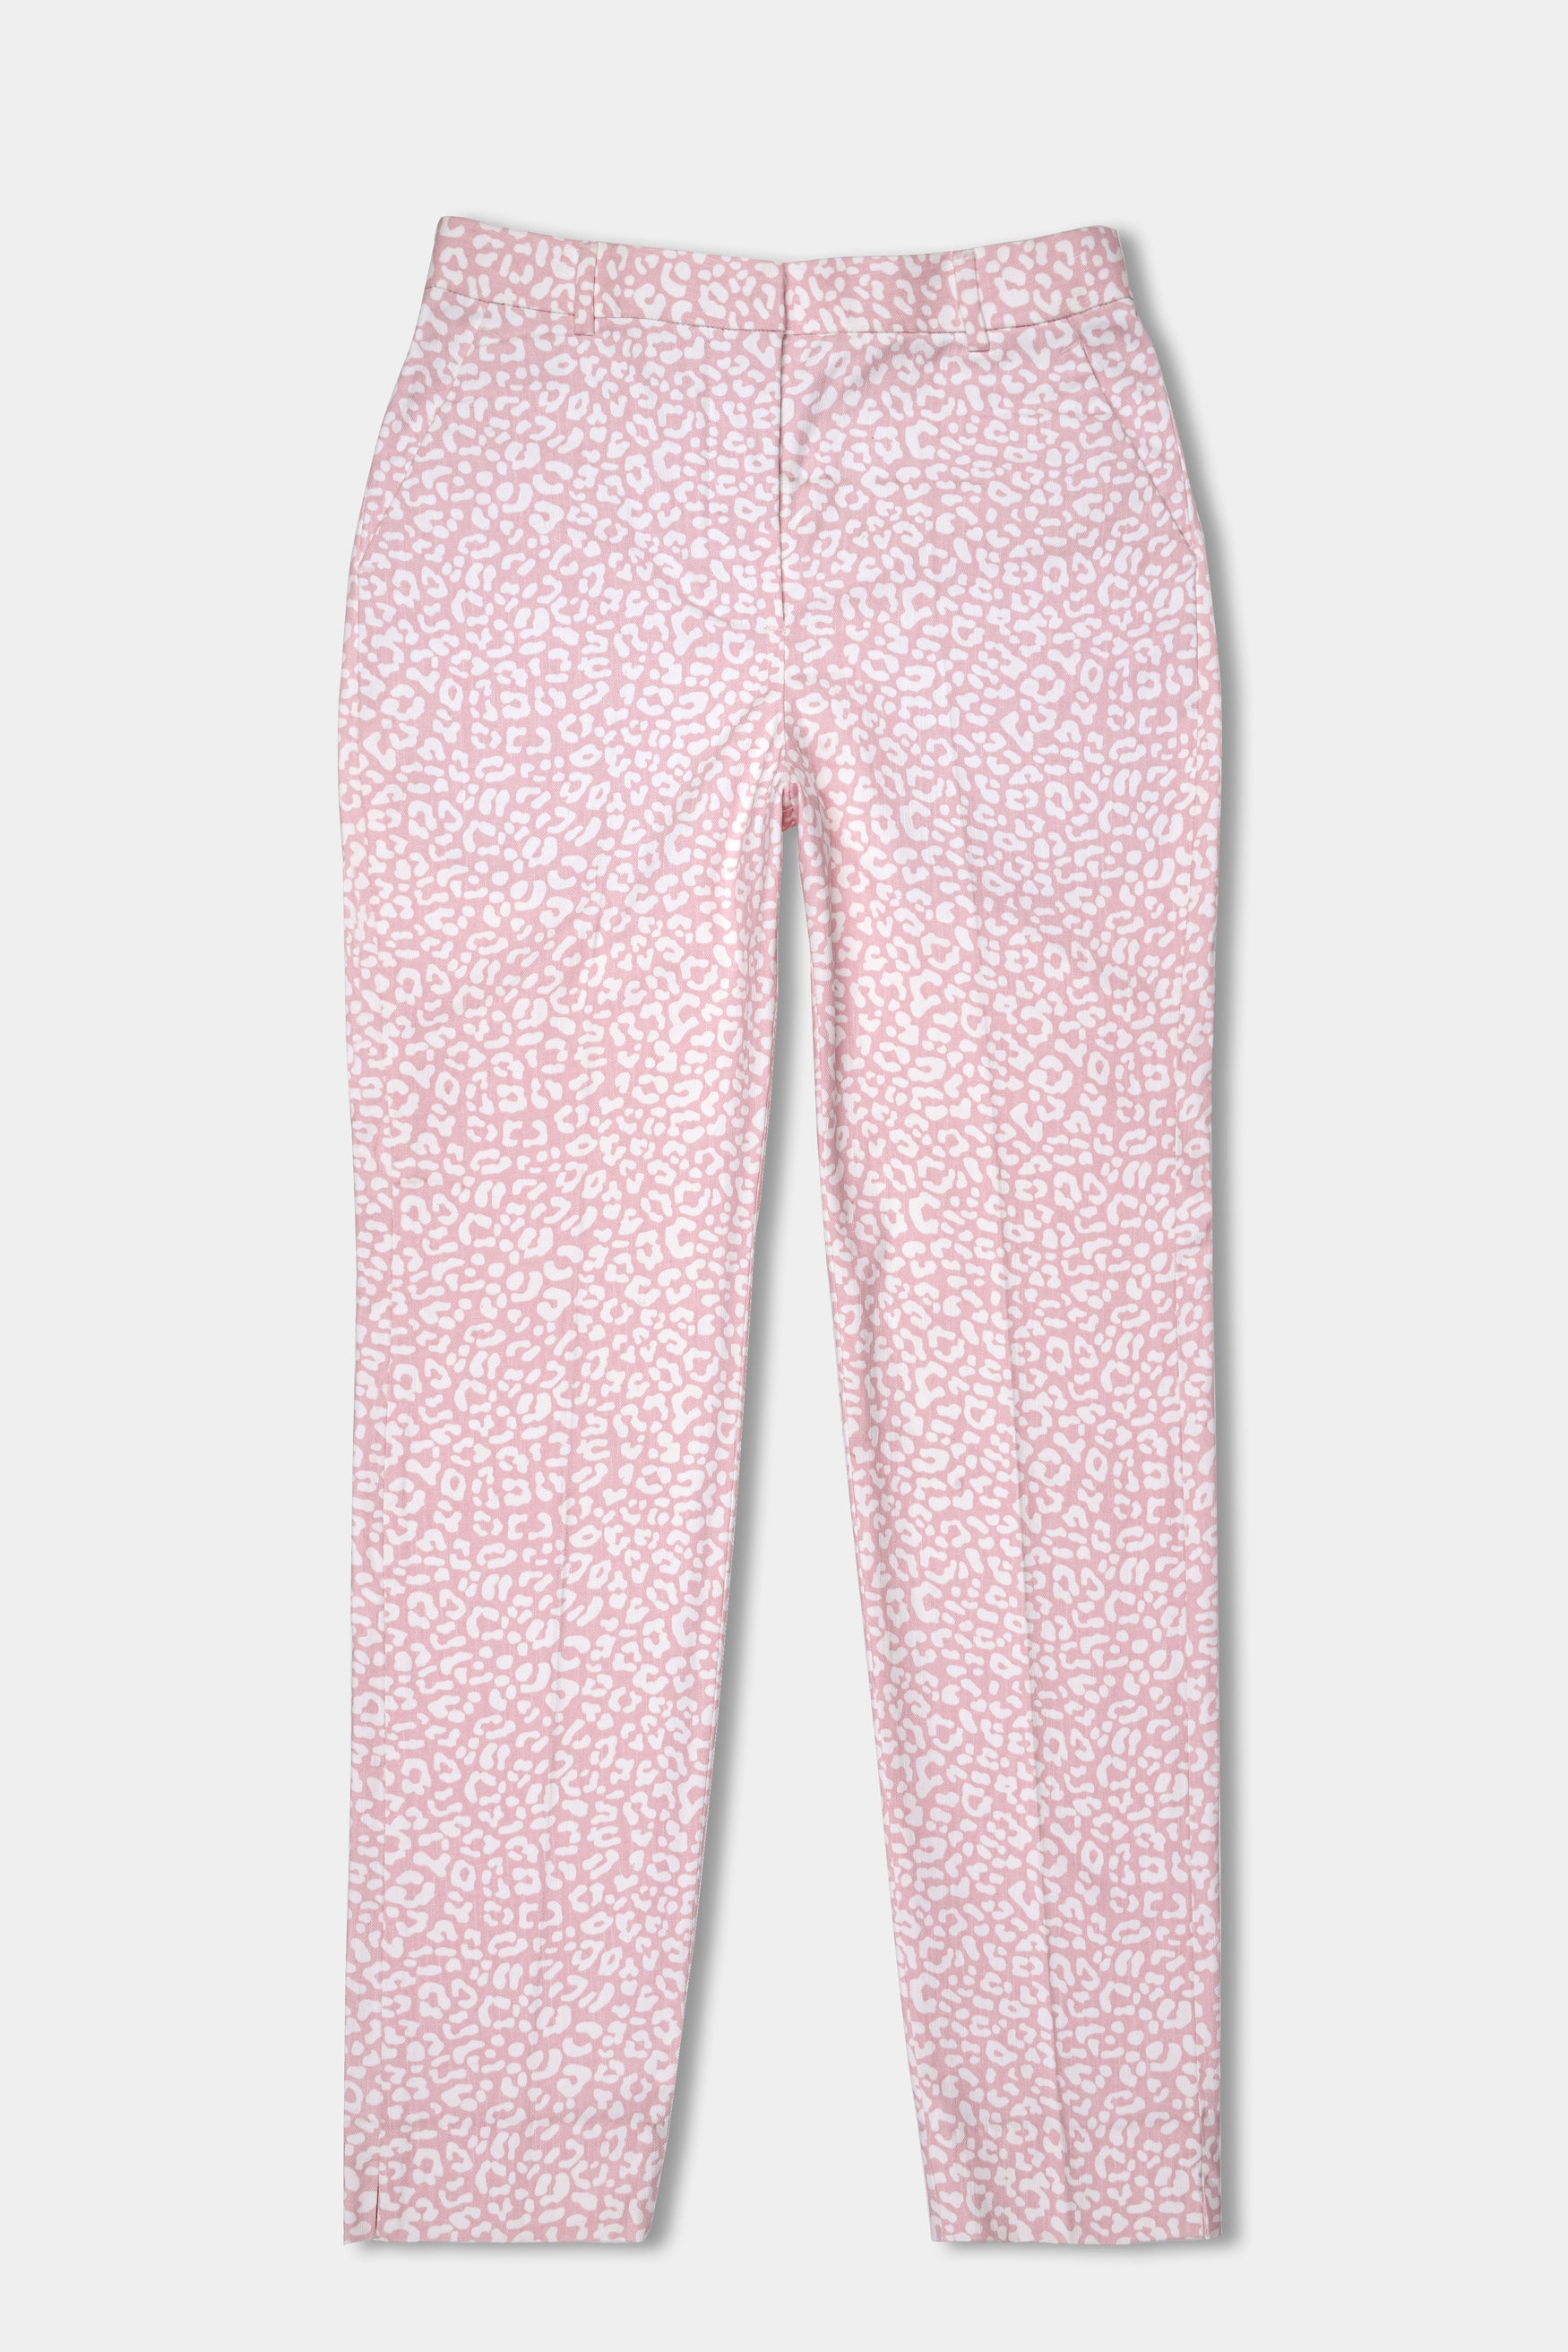 Thistle Pink and Bright White Animal Printed Premium Cotton Women’s Pant